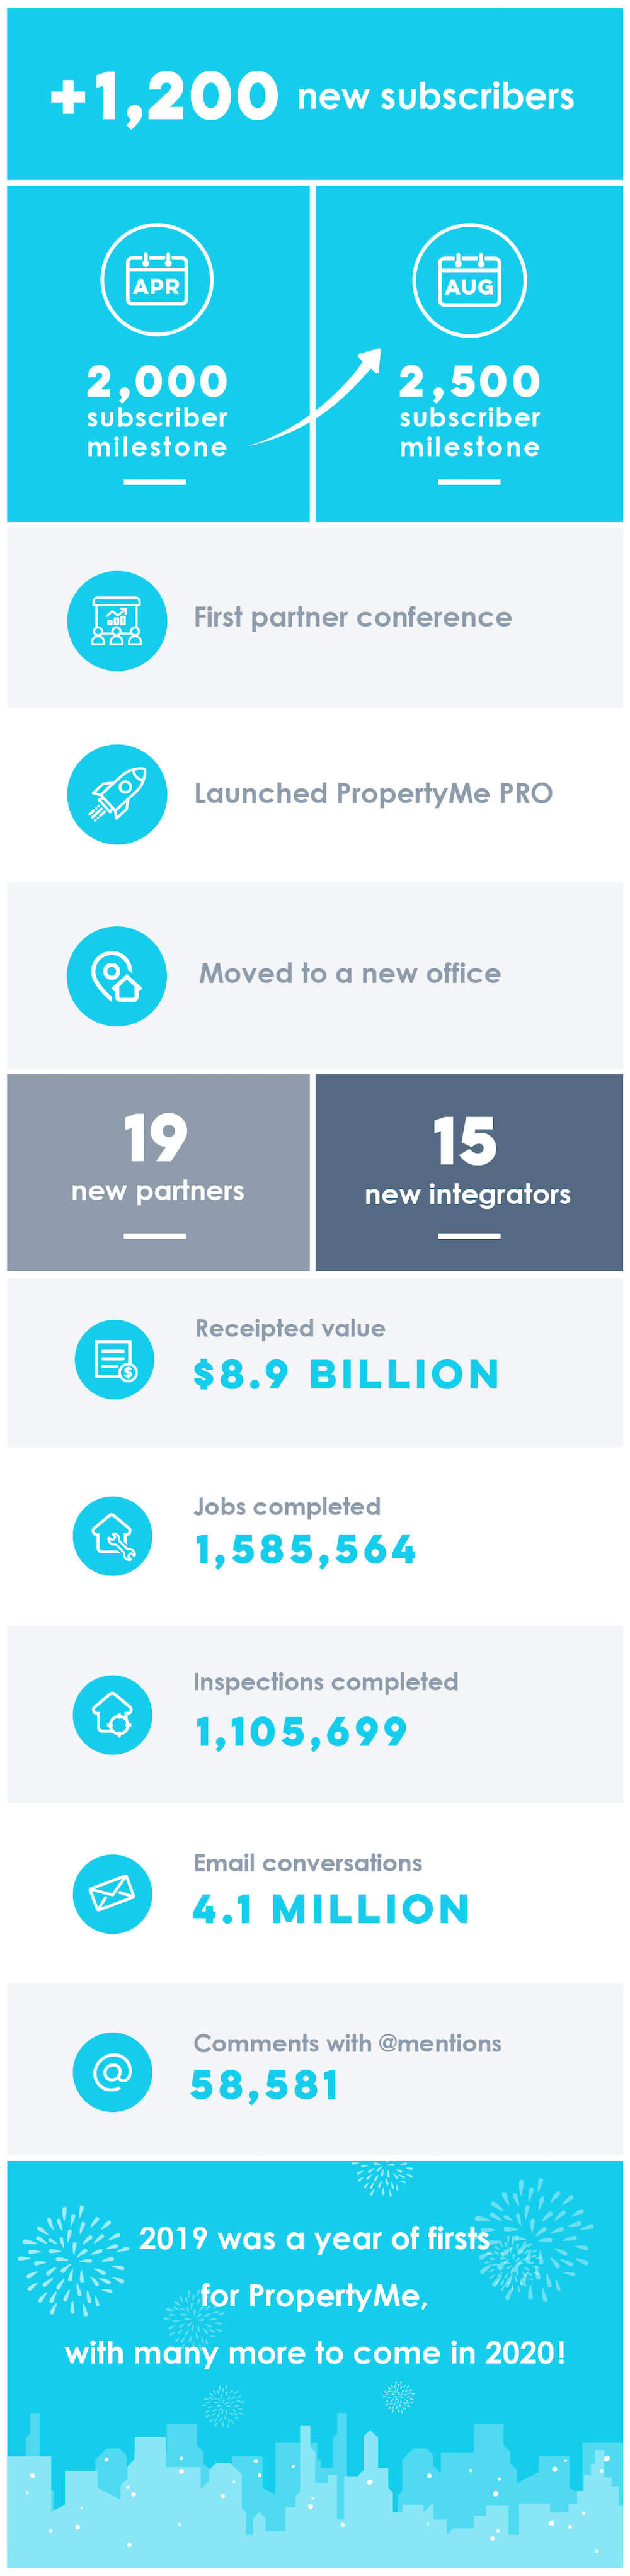 PropertyMe Year in Review 2019 Infographic